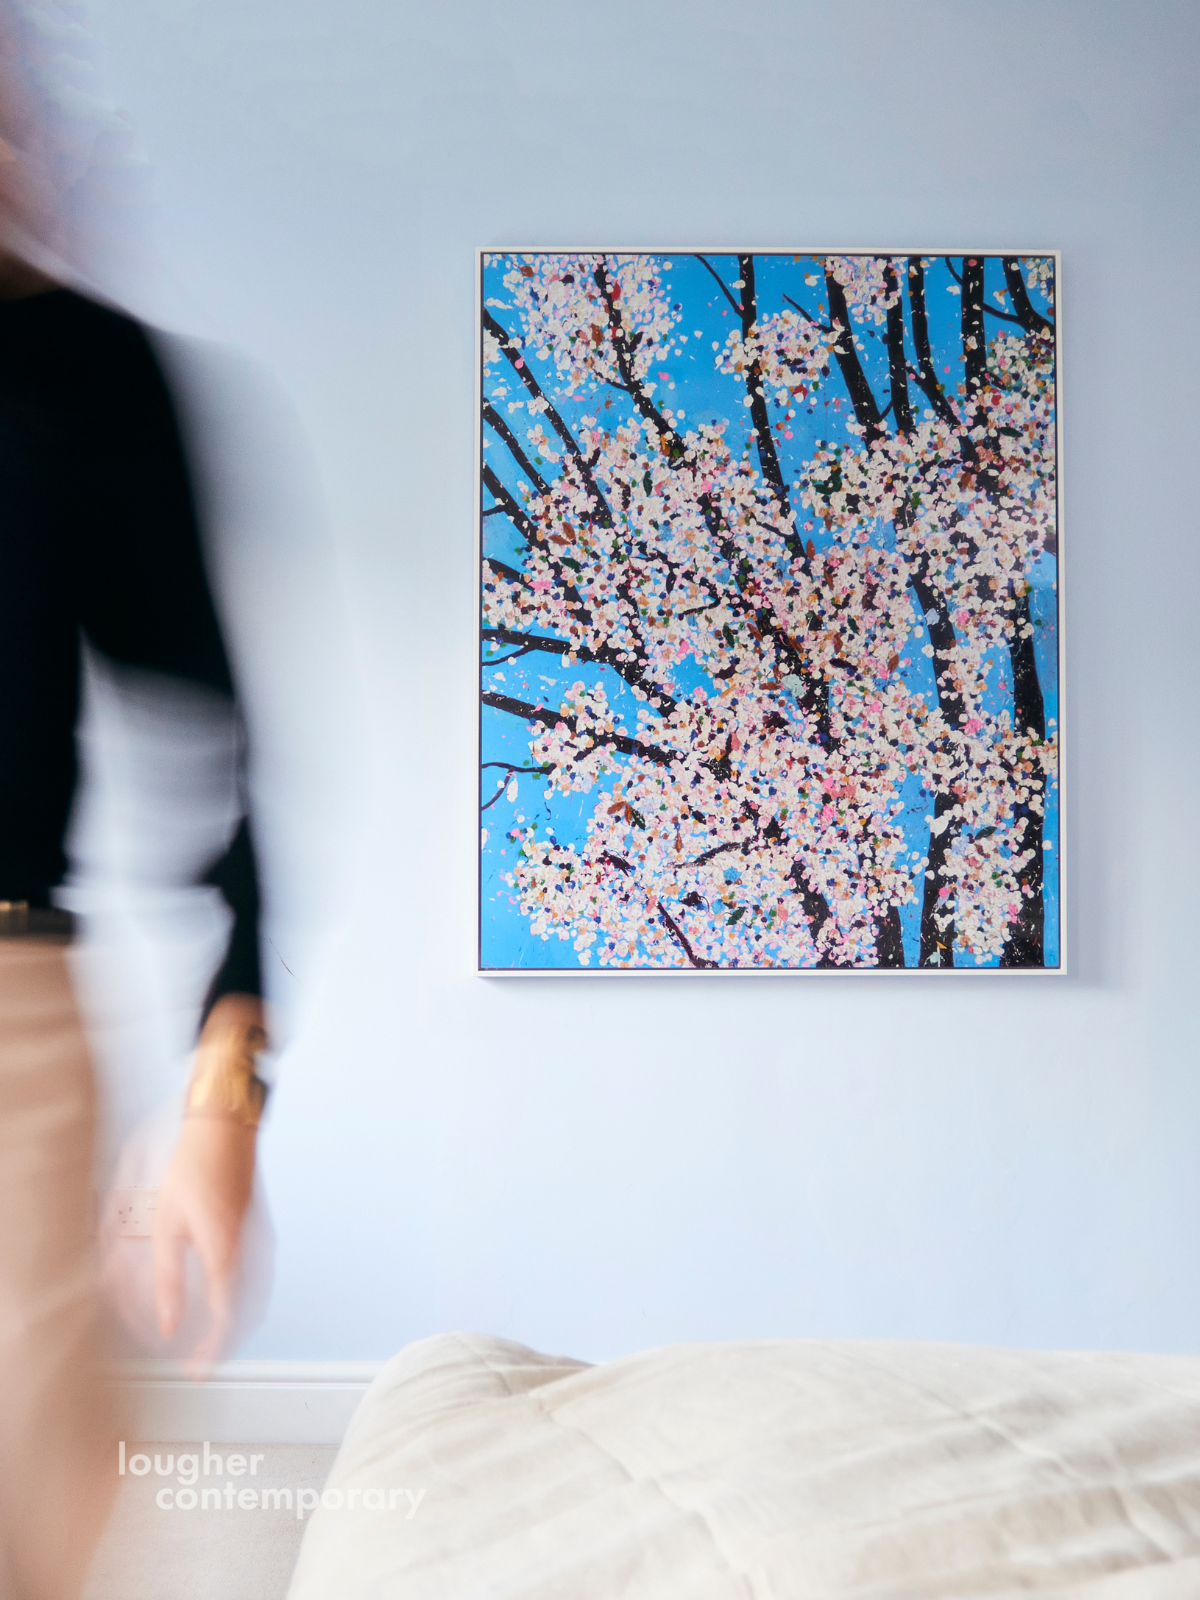 Damien Hirst Cherry Blossom Print on Bedroom Wall